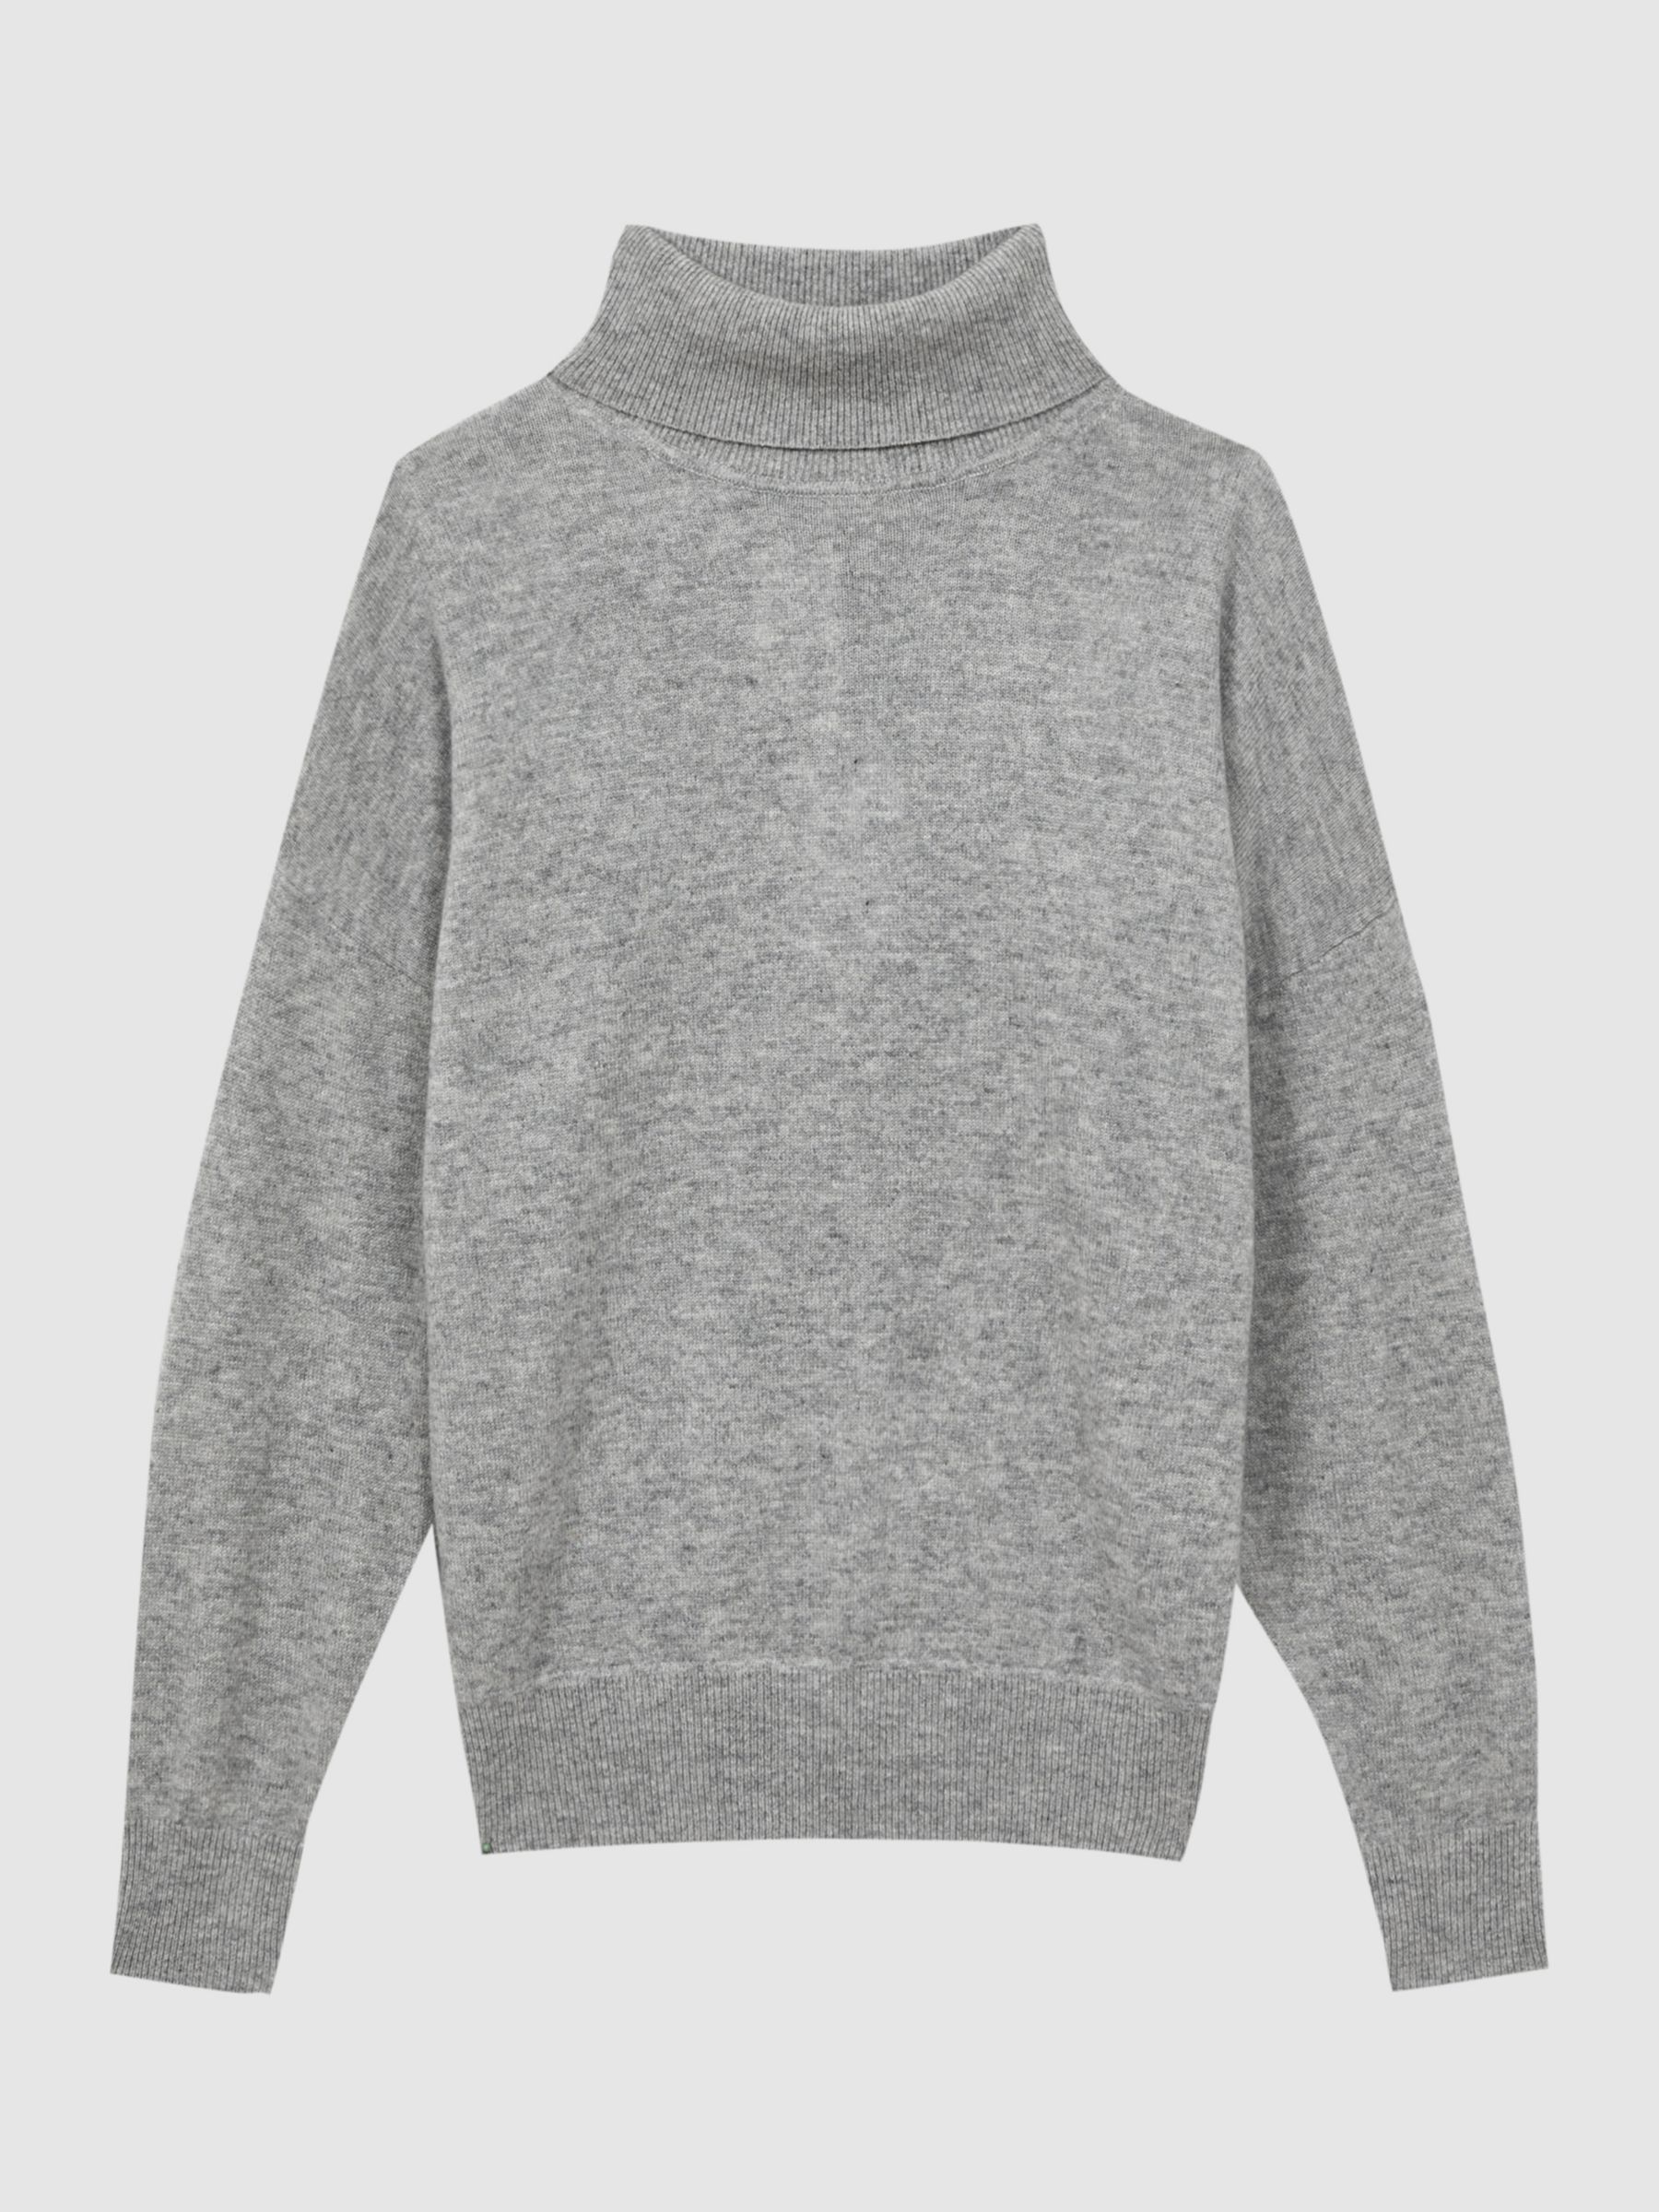 Reiss Mabel Cashmere Roll Neck Jumper, Grey at John Lewis & Partners